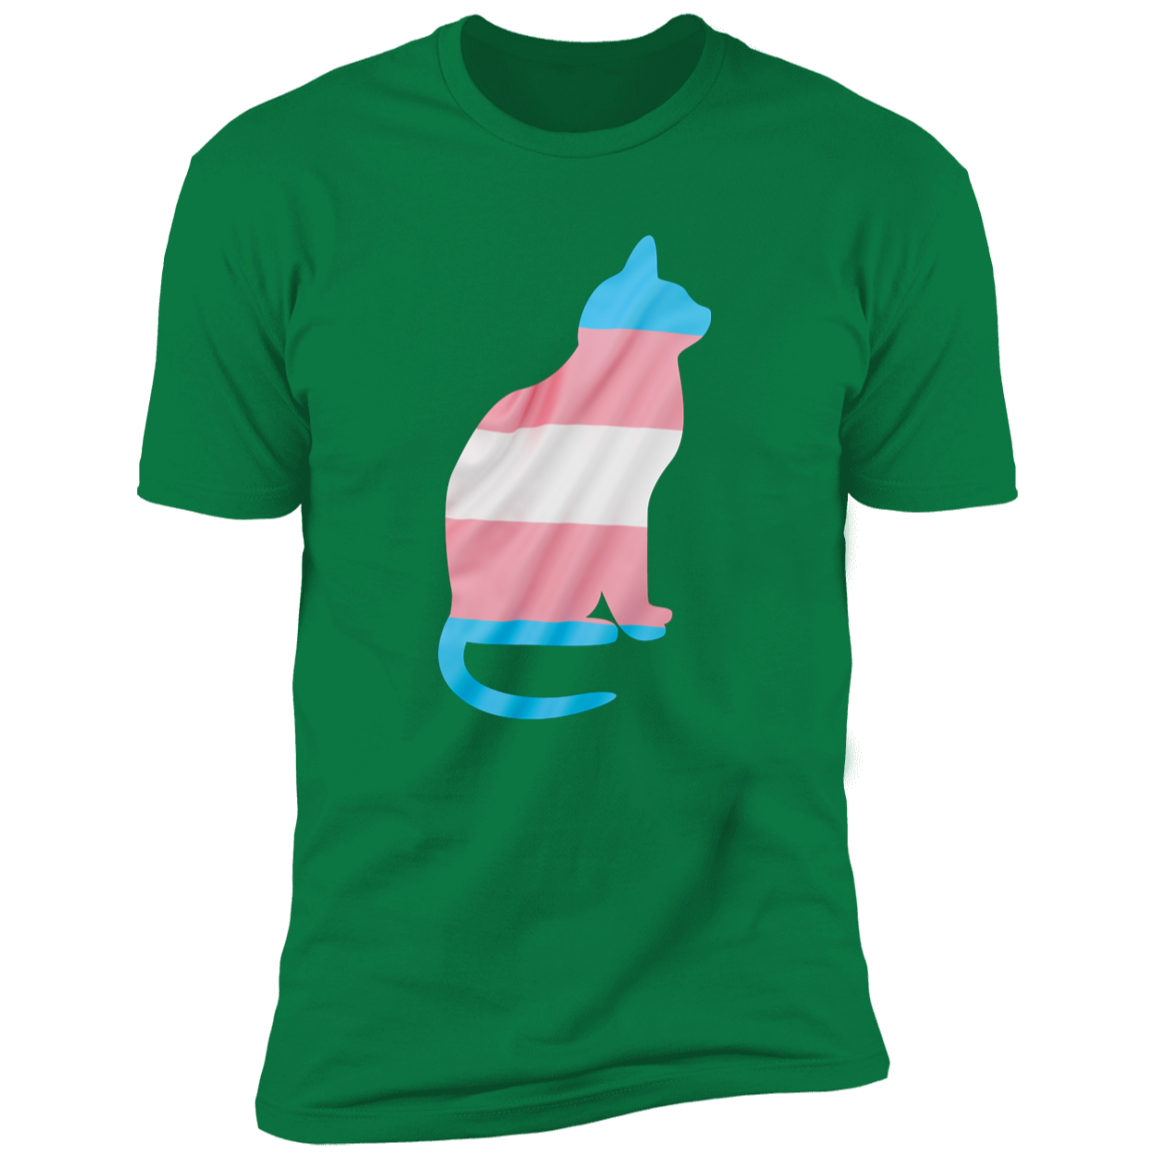 Trans Pride Cat Pride T-shirt, Trans Pride Cat Shirt for humans, in kelly green